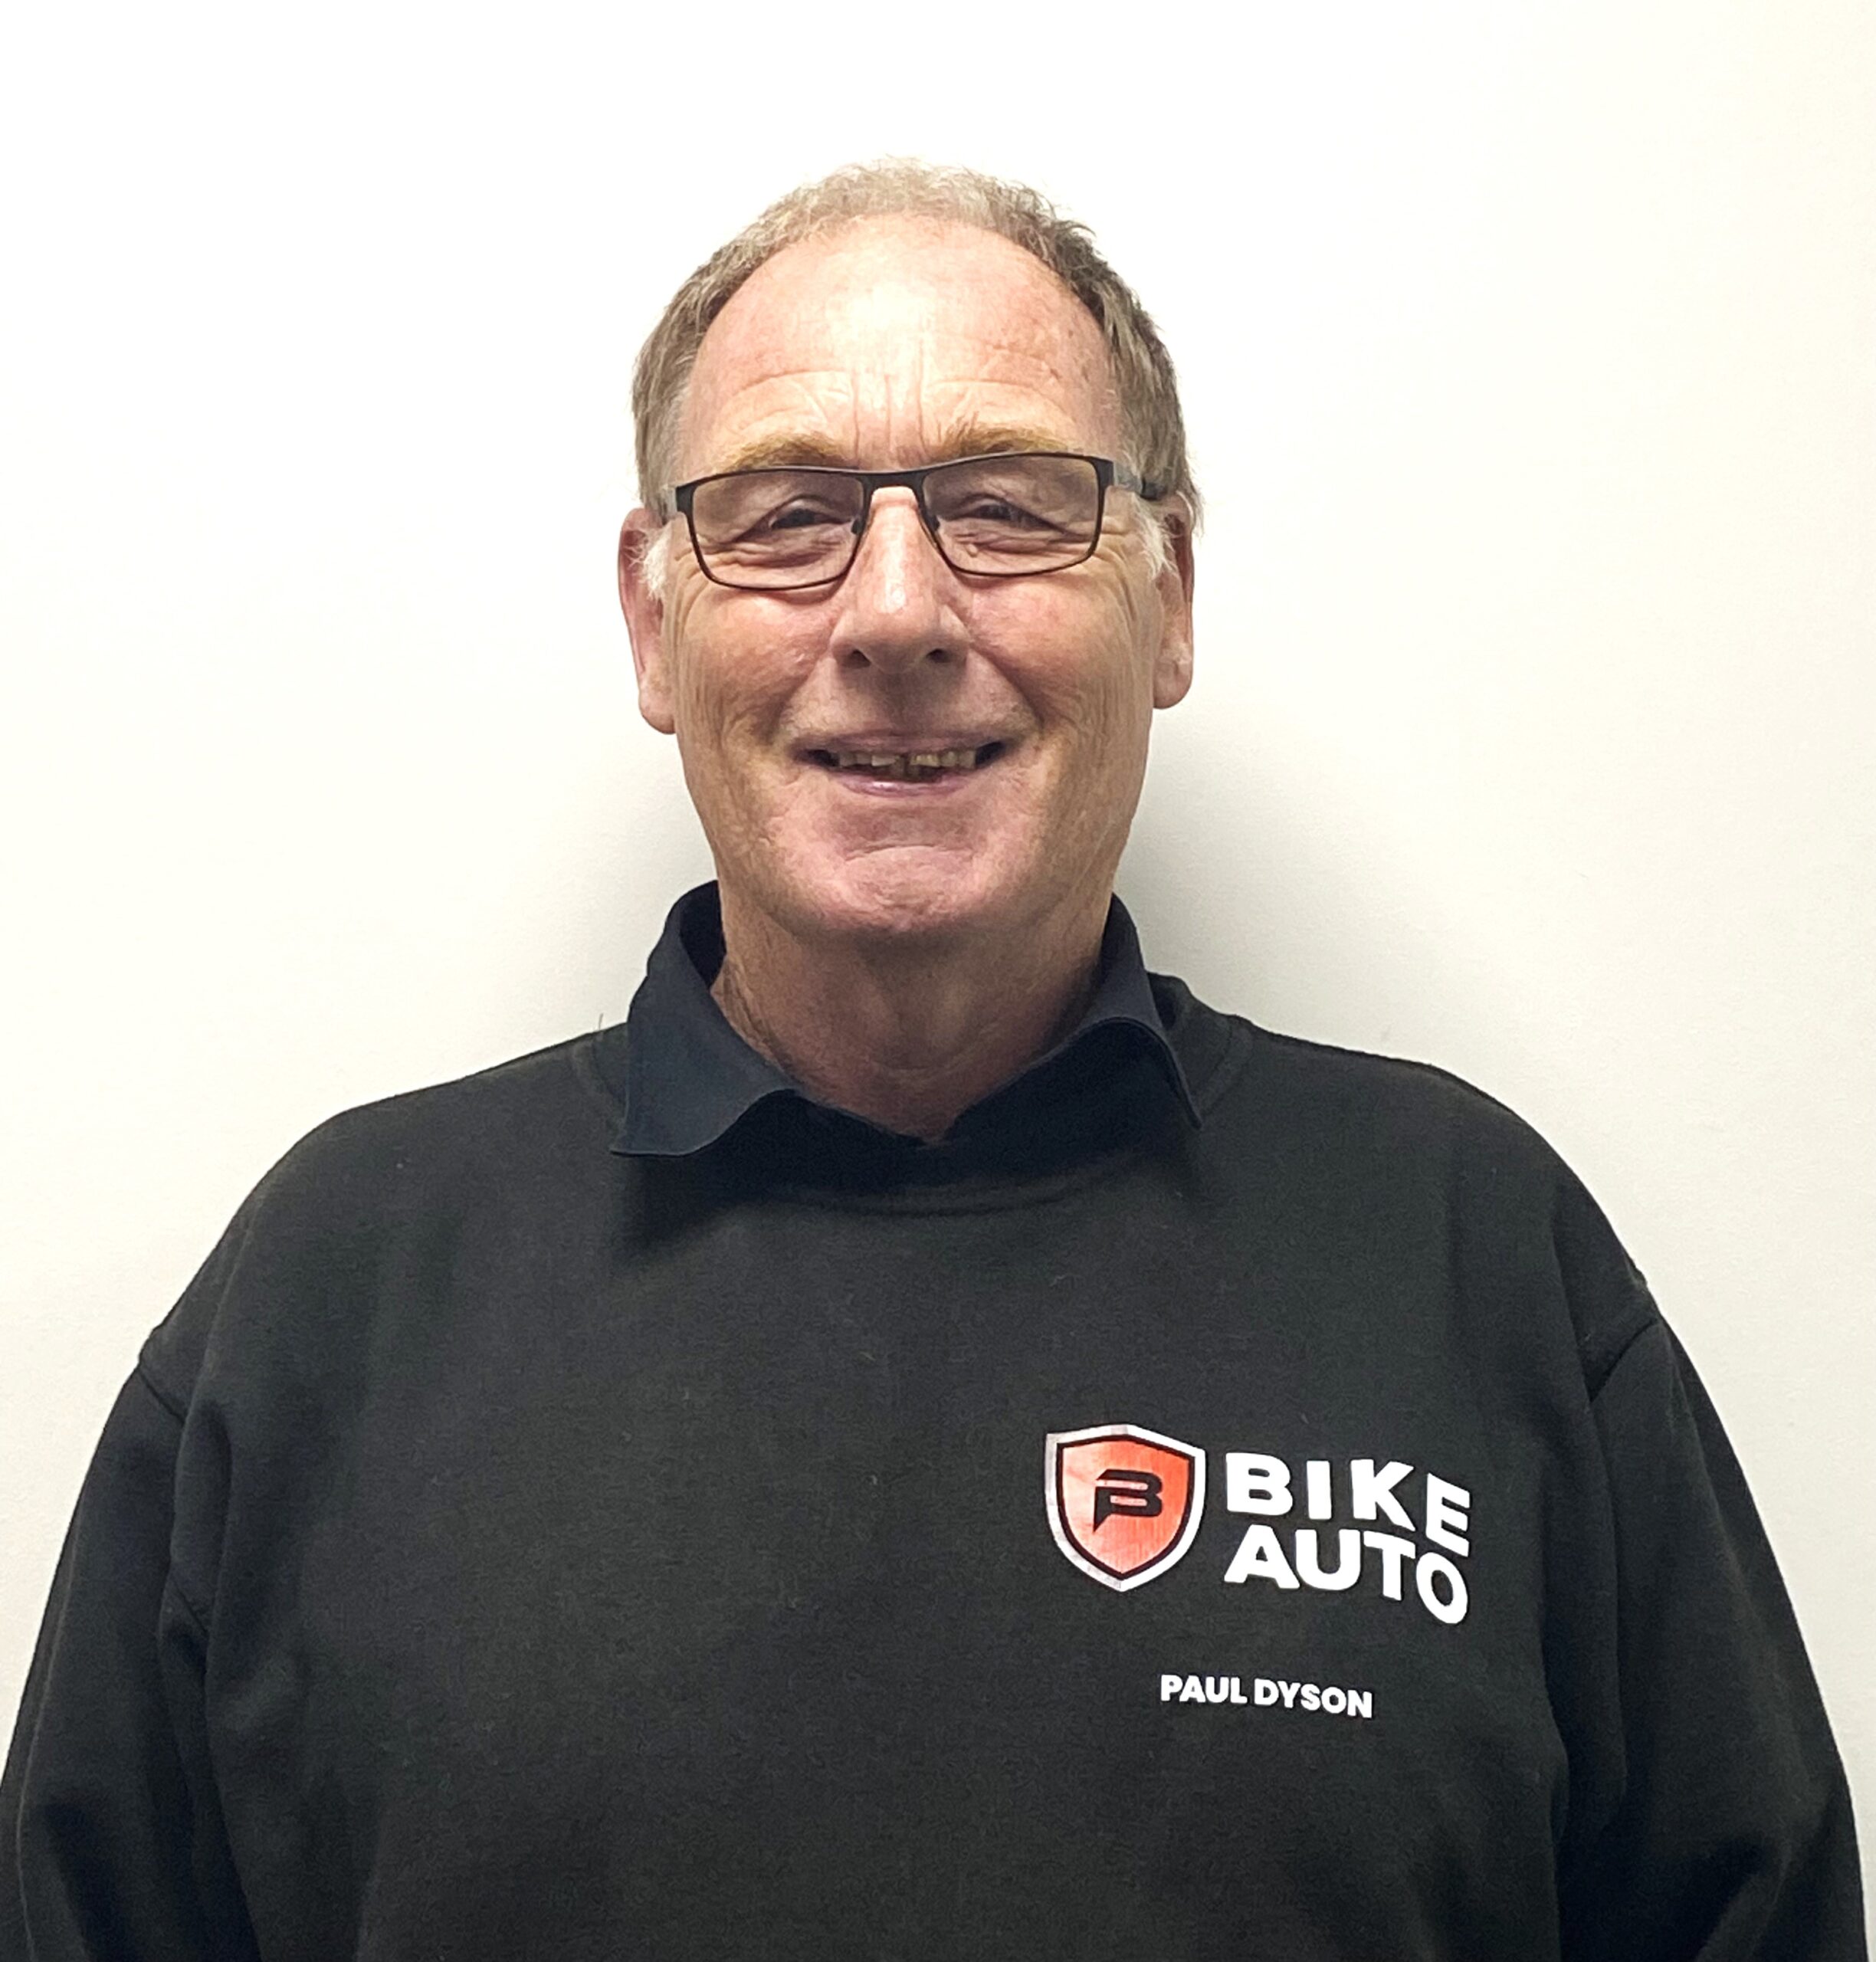 Photo of owner, Paul Dyson, in branded Bike Auto workwear.